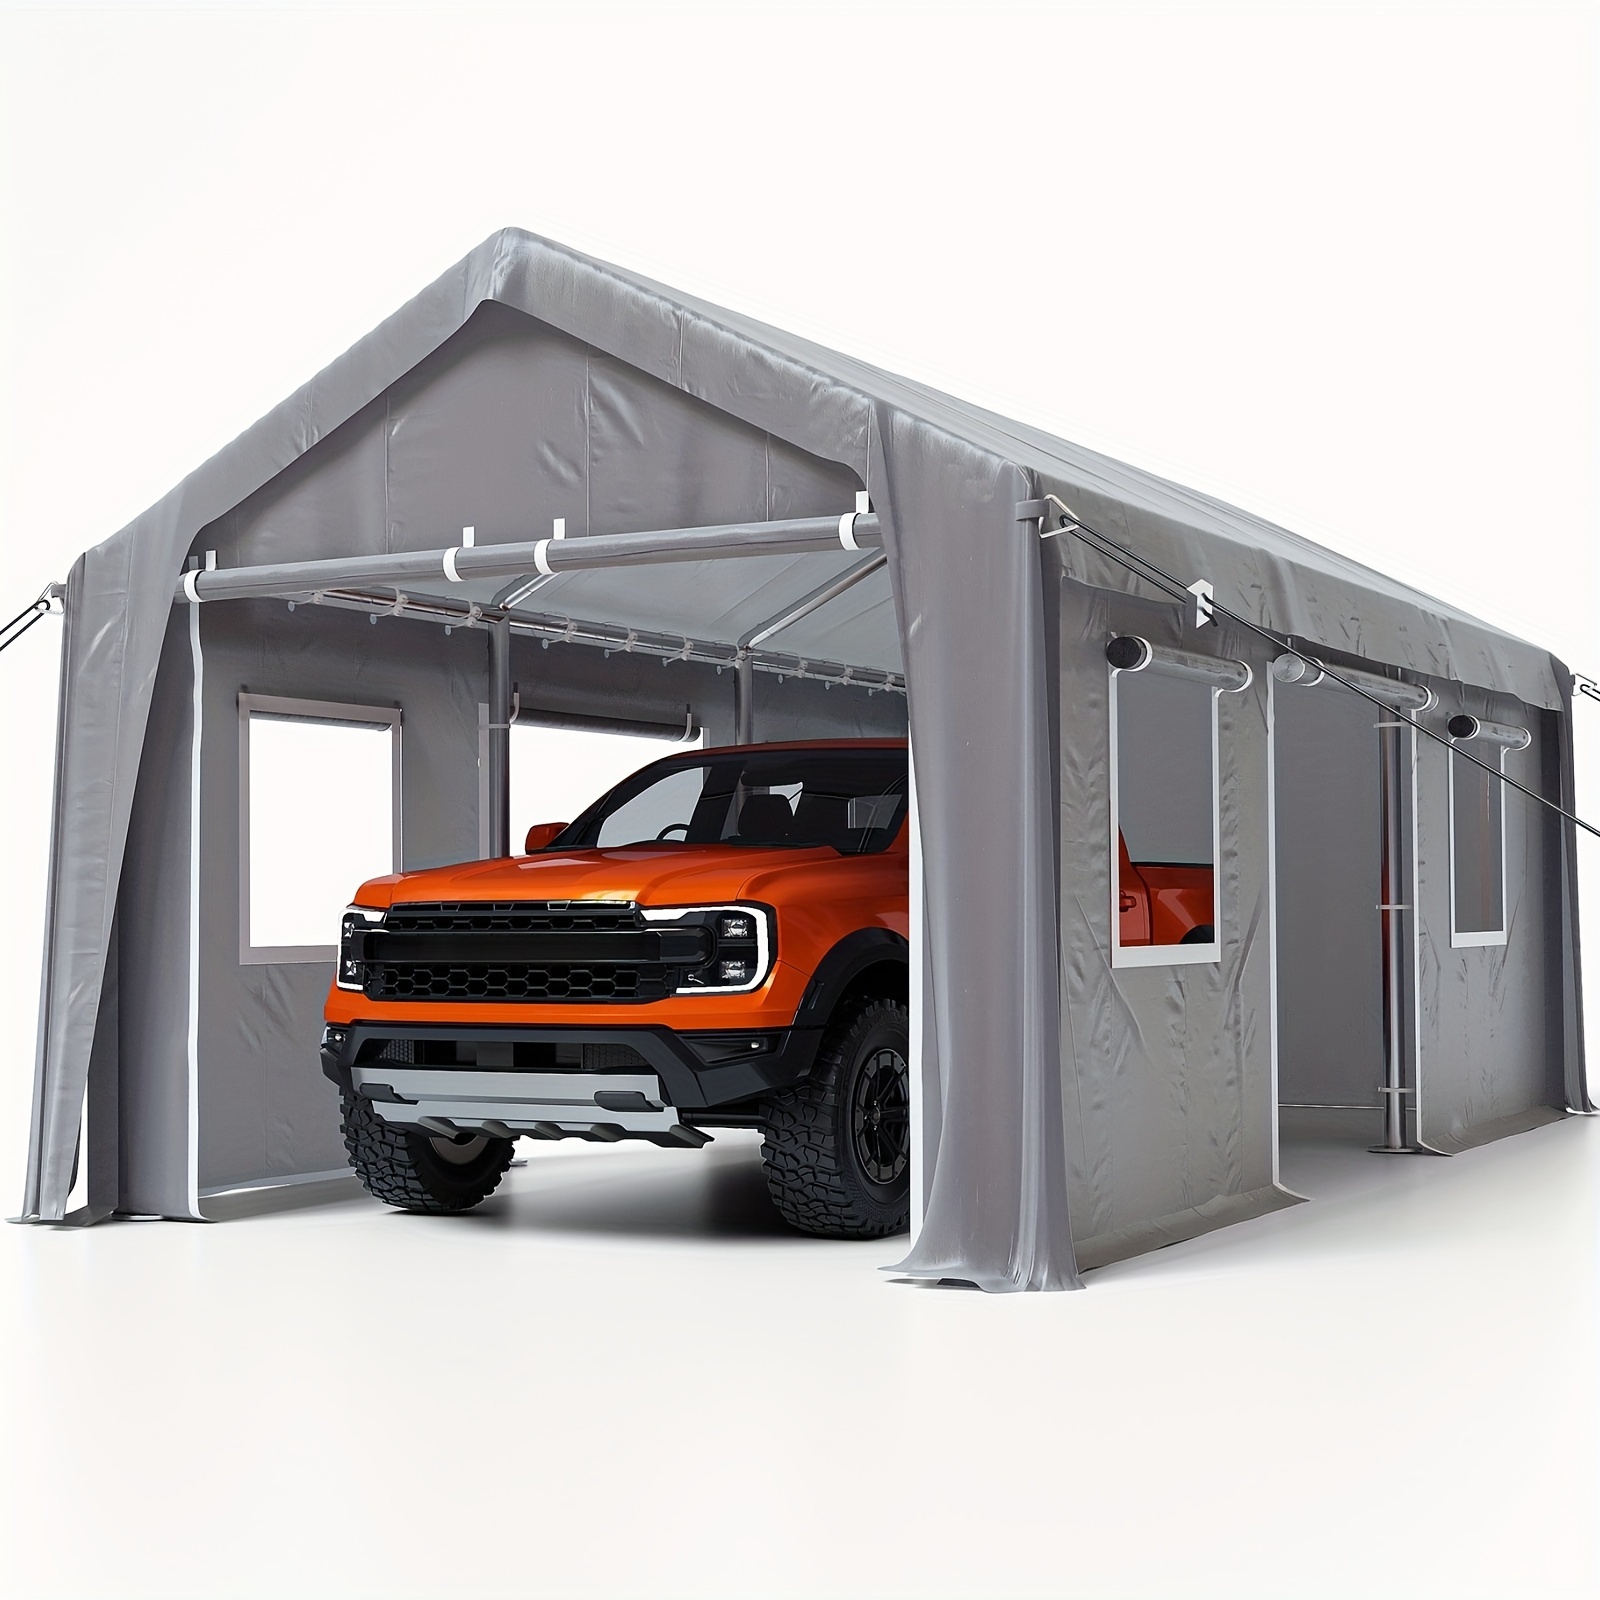 

Carport 13'x20' Portable Garage, Heavy Duty Carport Canopy, Reinforced Steel Poles, 4 Roll-up Doors & 4 Windows, For Pickup, Boat, And Equipment